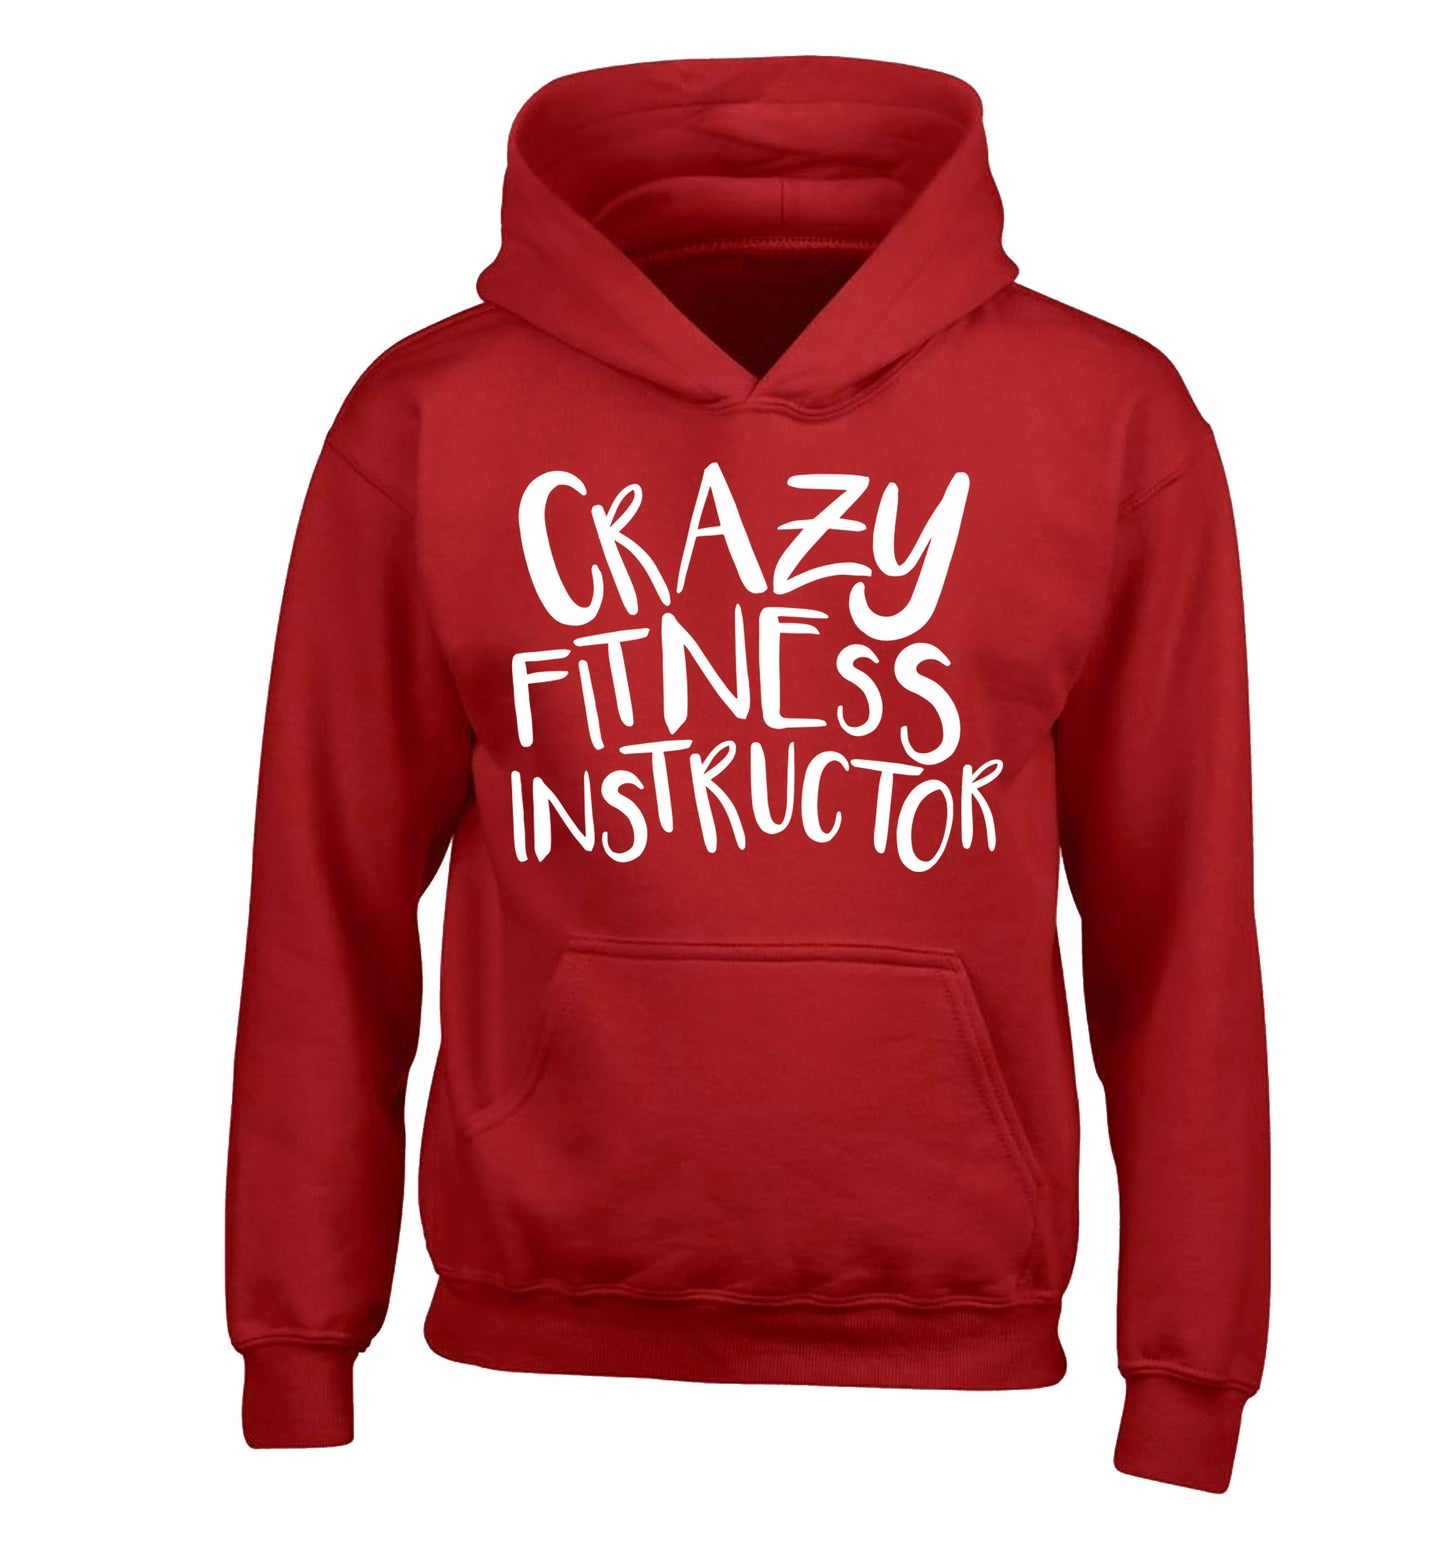 Crazy fitness instructor children's red hoodie 12-13 Years